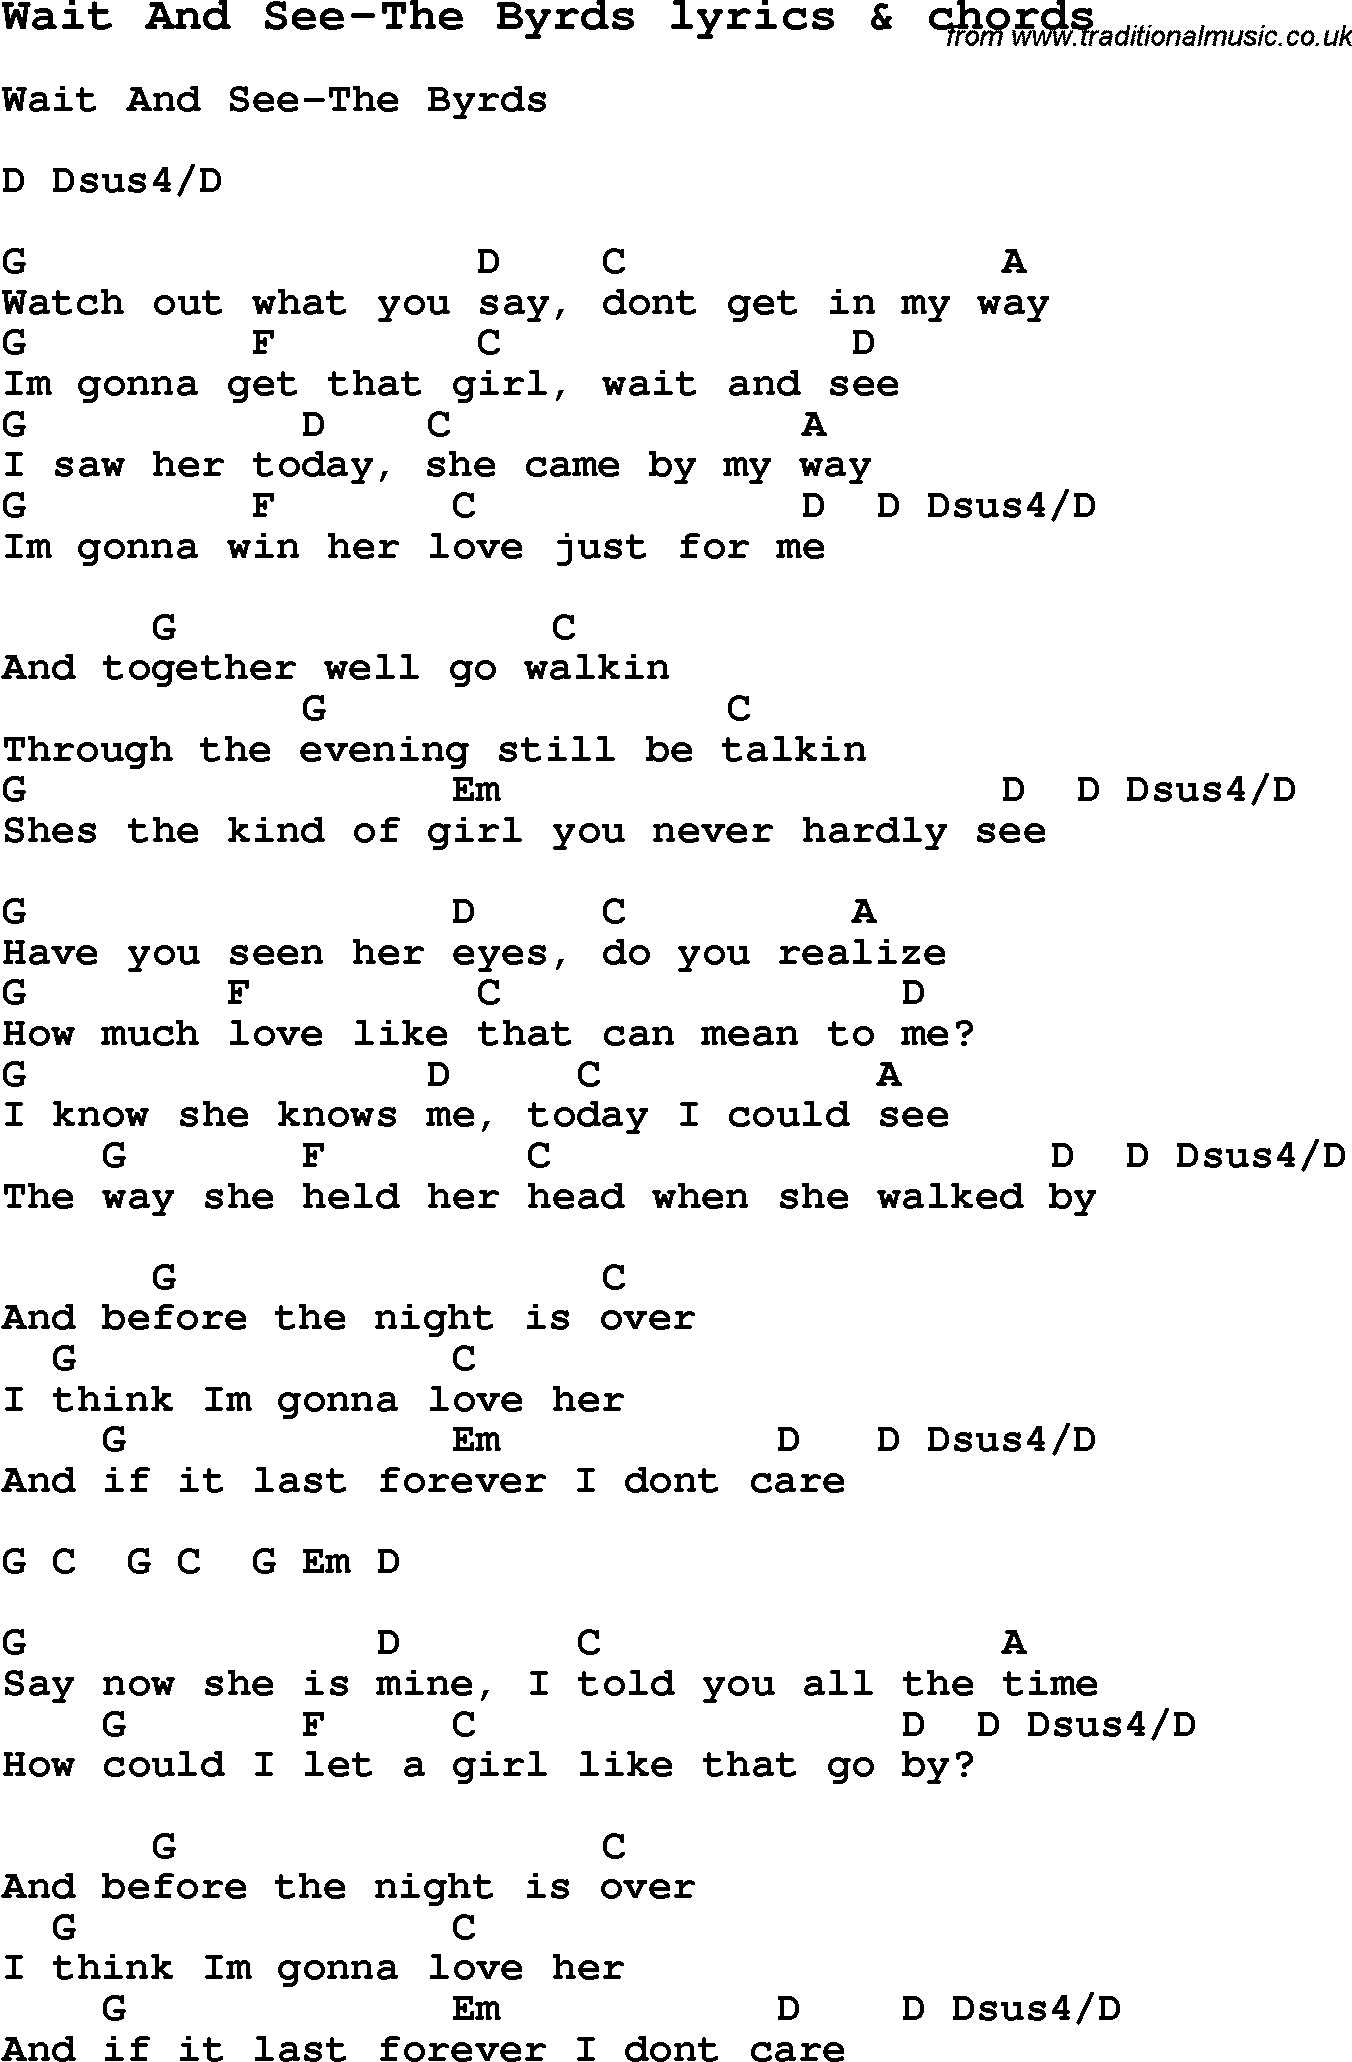 Love Song Lyrics for: Wait And See-The Byrds with chords for Ukulele, Guitar Banjo etc.